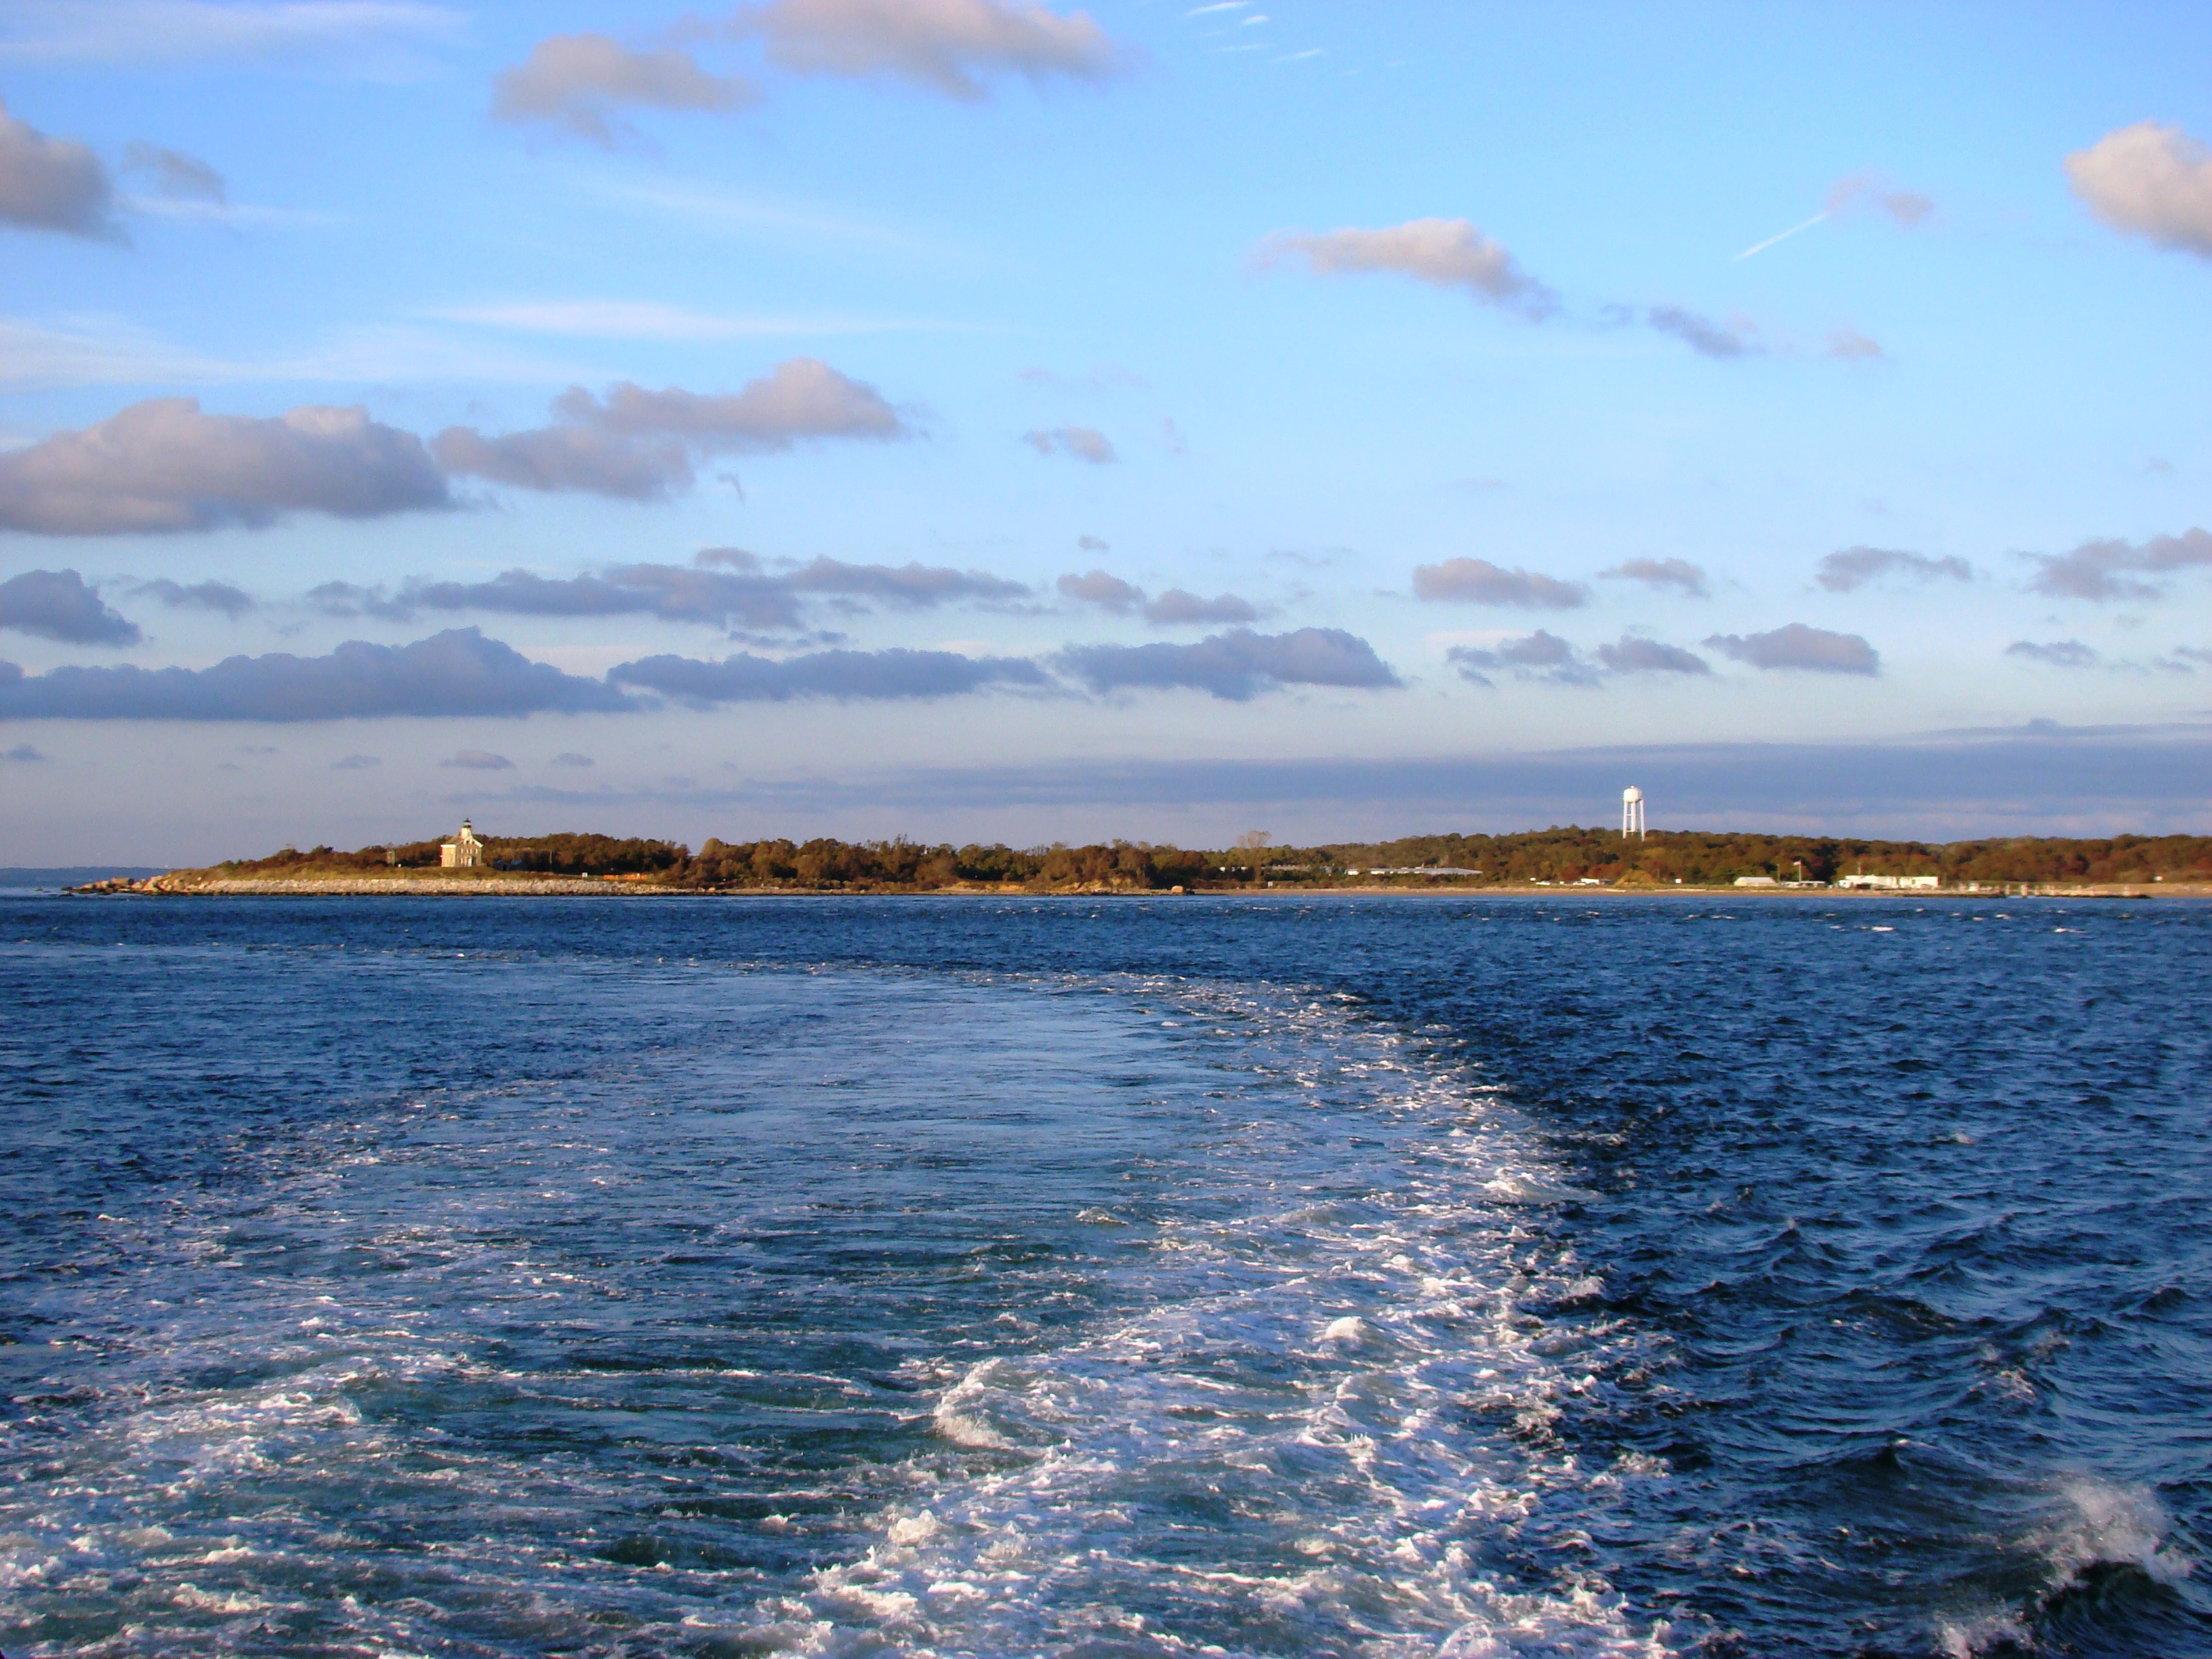 Plum Island in the distance